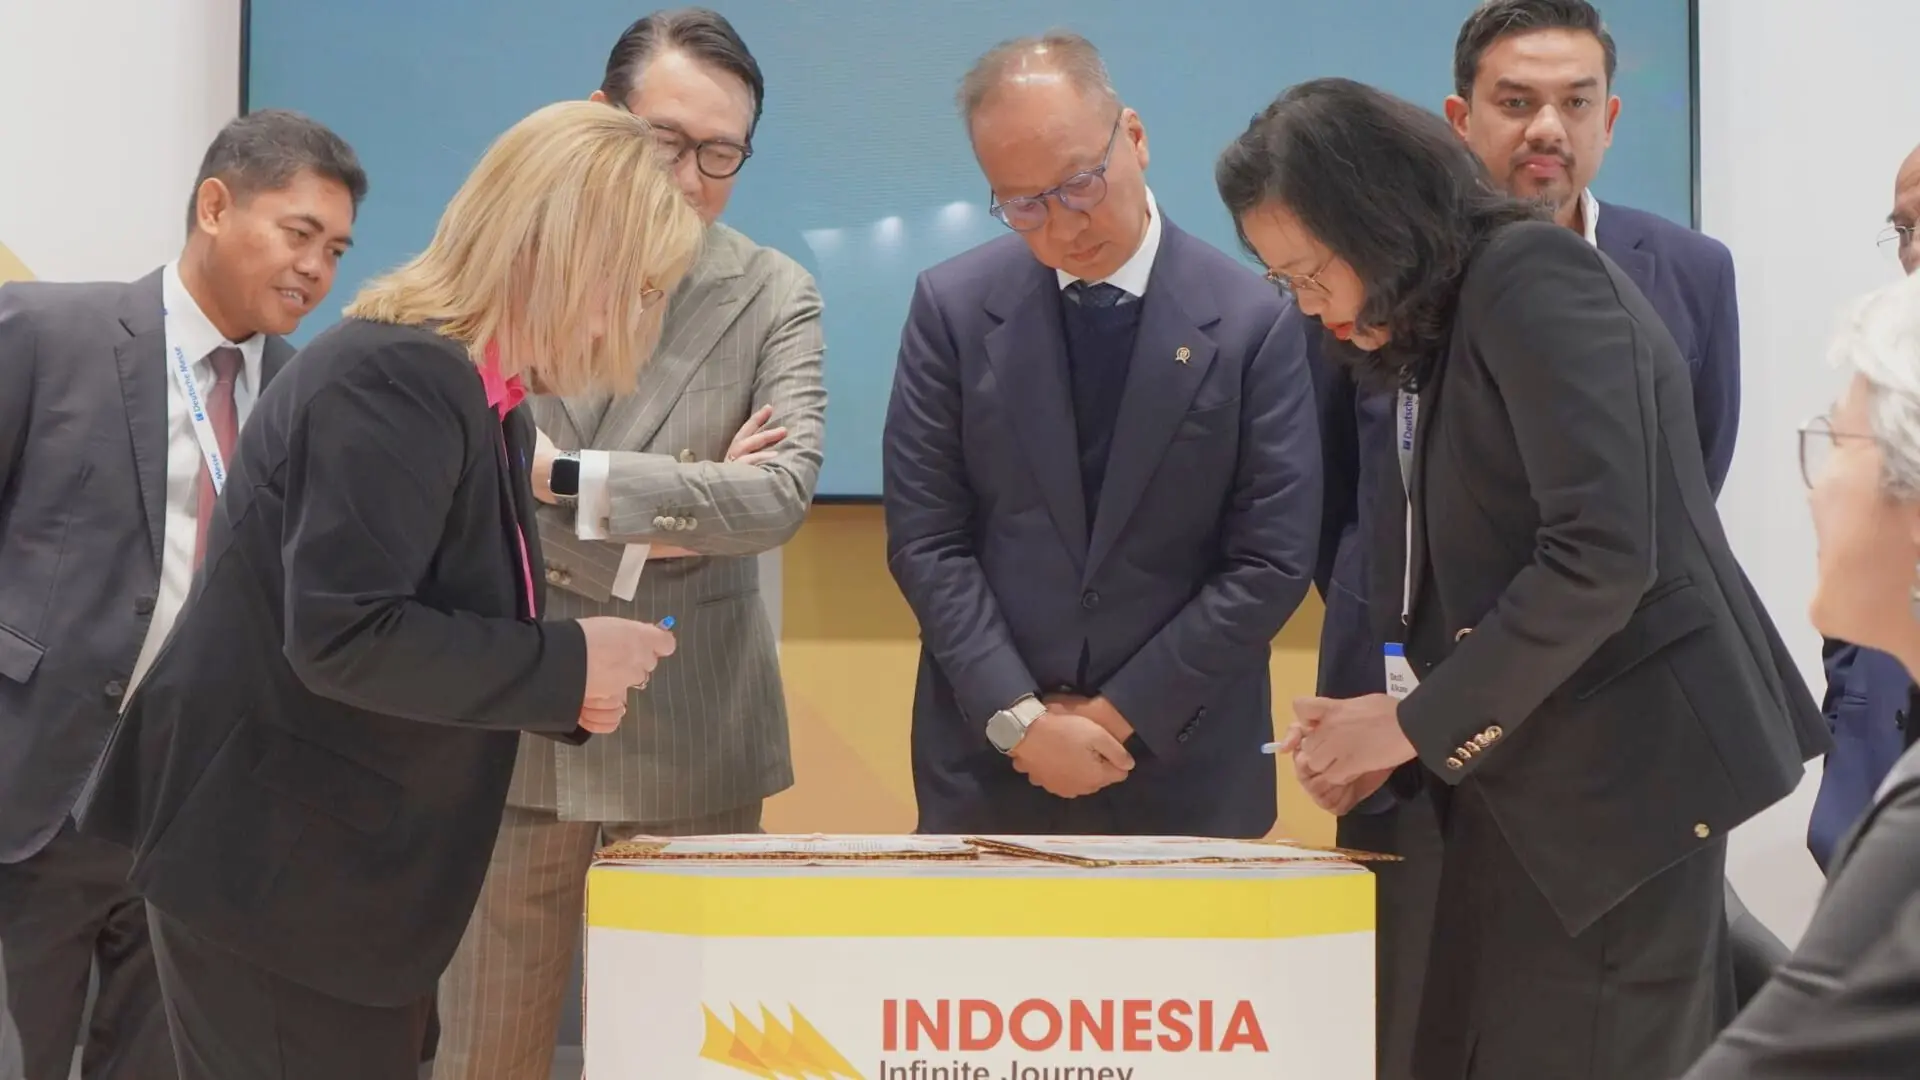 Two executives, one from ECADIN and another from TUV NORD CERT, seated at a polished conference table, exchanging signed documents with satisfied smiles. In the background, a banner displaying "Sustainable Industry Indonesia" hangs prominently, symbolizing the collaborative effort towards sustainability in the industrial sector. Bright, natural light floods the room, evoking a sense of clarity and transparency in the partnership.